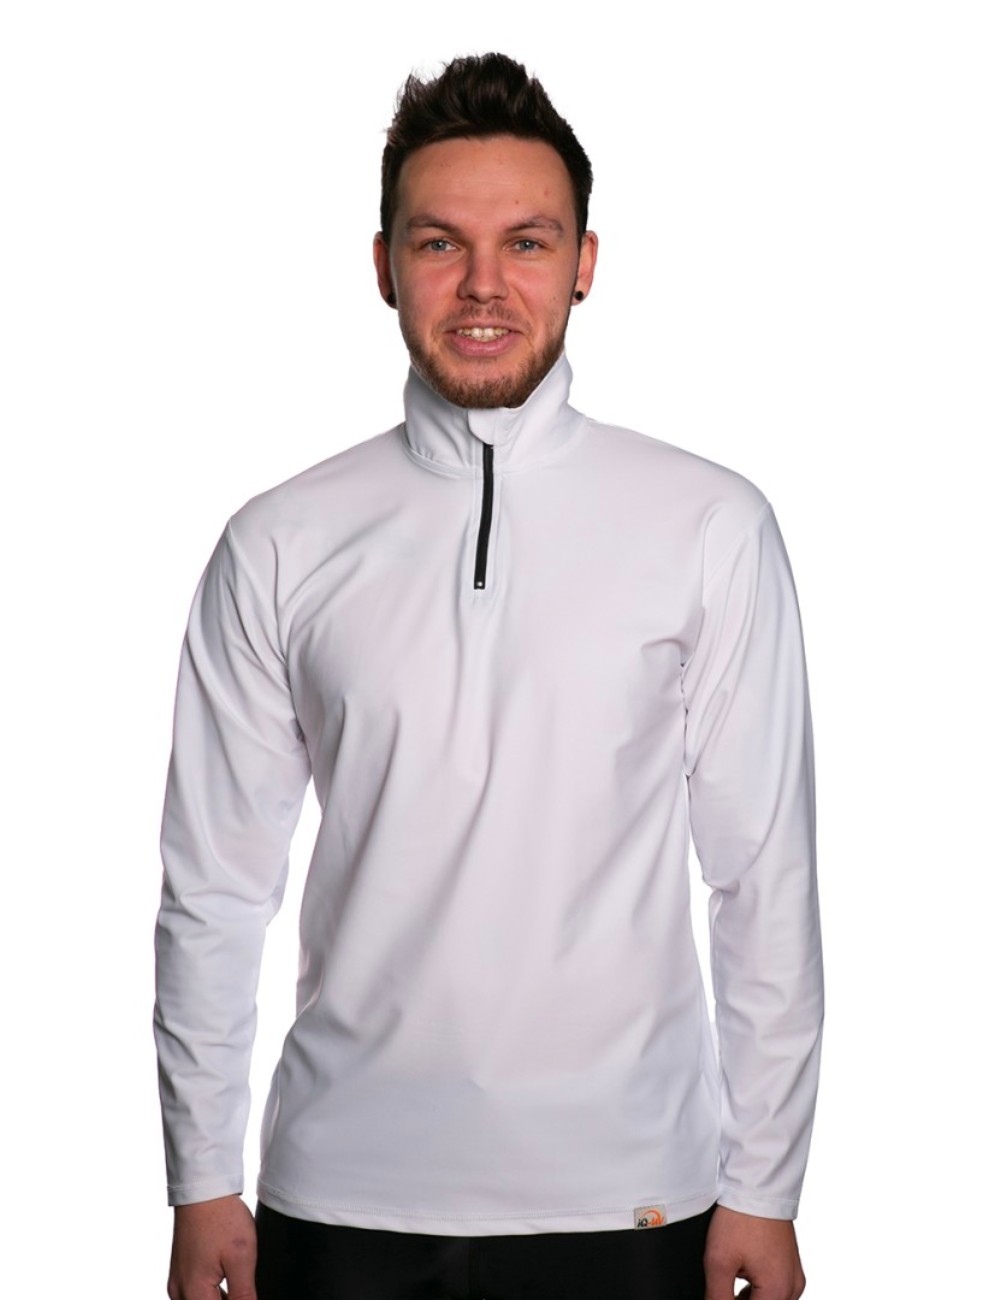 Men's long-sleeved shirt with zip fastening Water sports and leisure